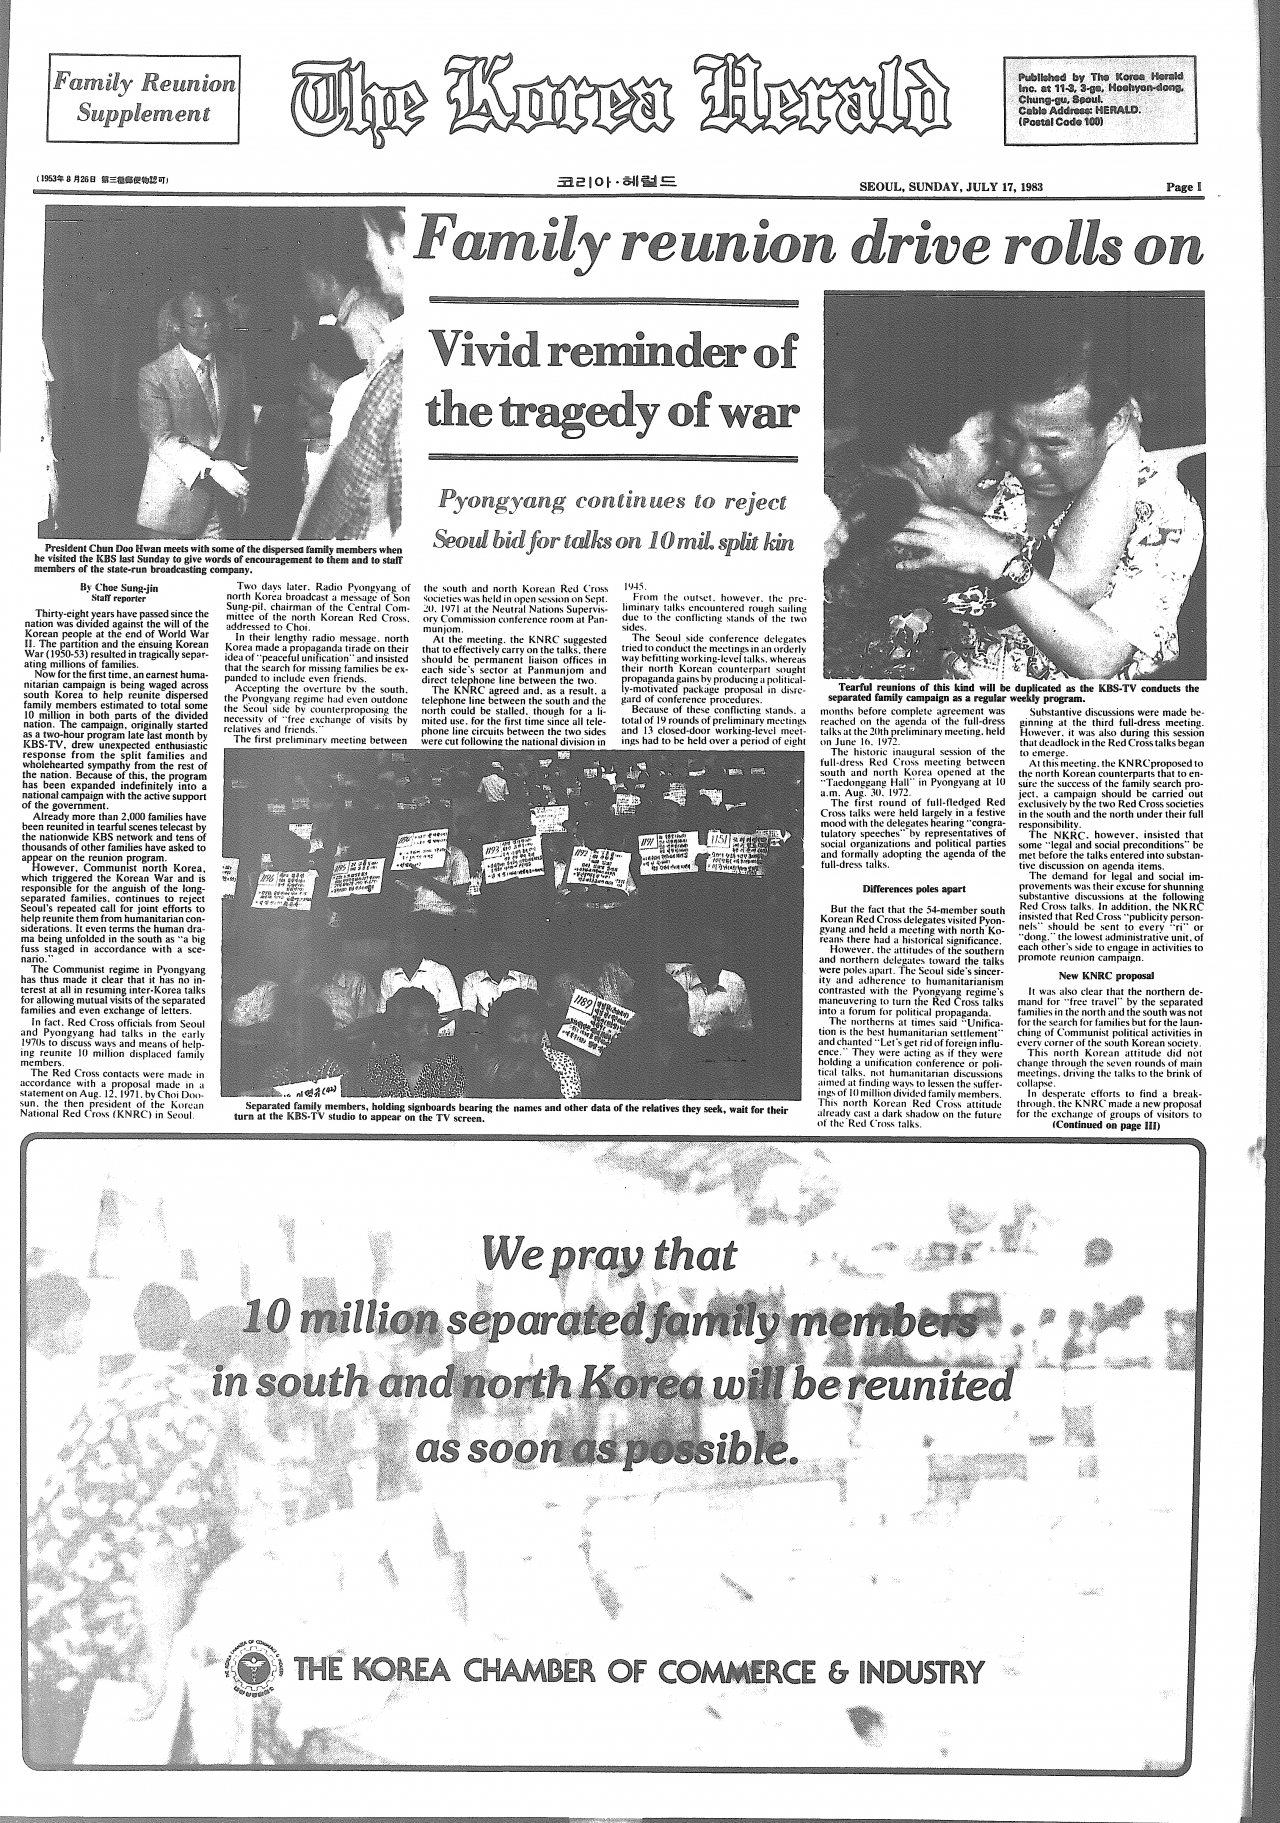 The July 17, 1983 edition of The Korea Herald